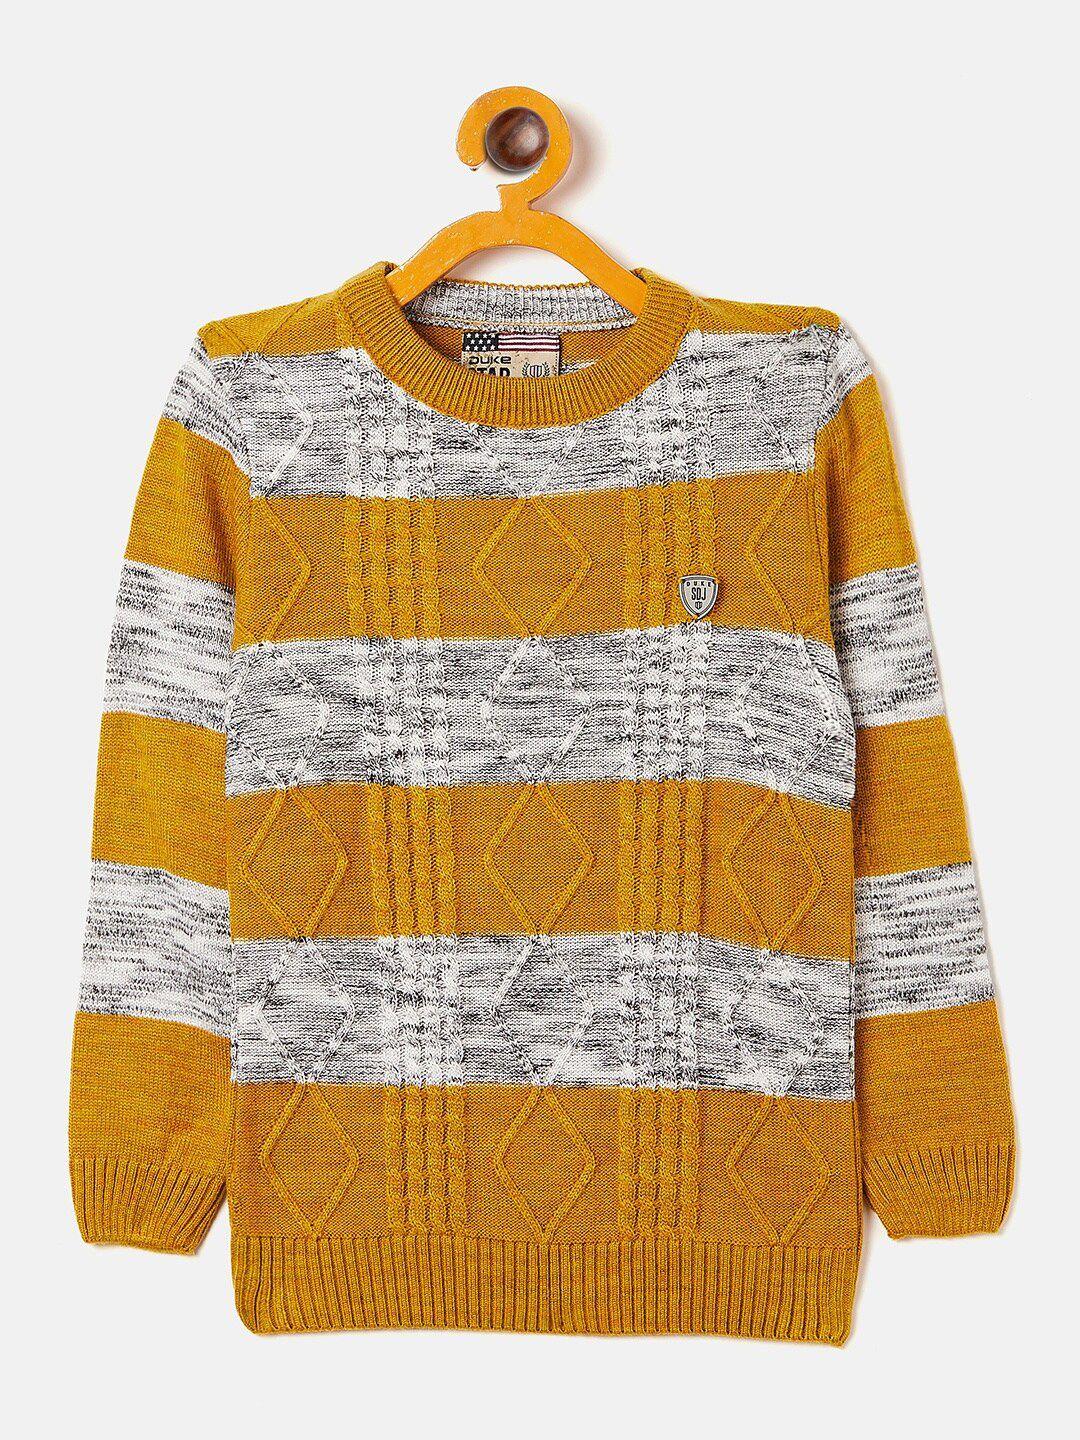 duke boys mustard yellow & grey cable knit pullover